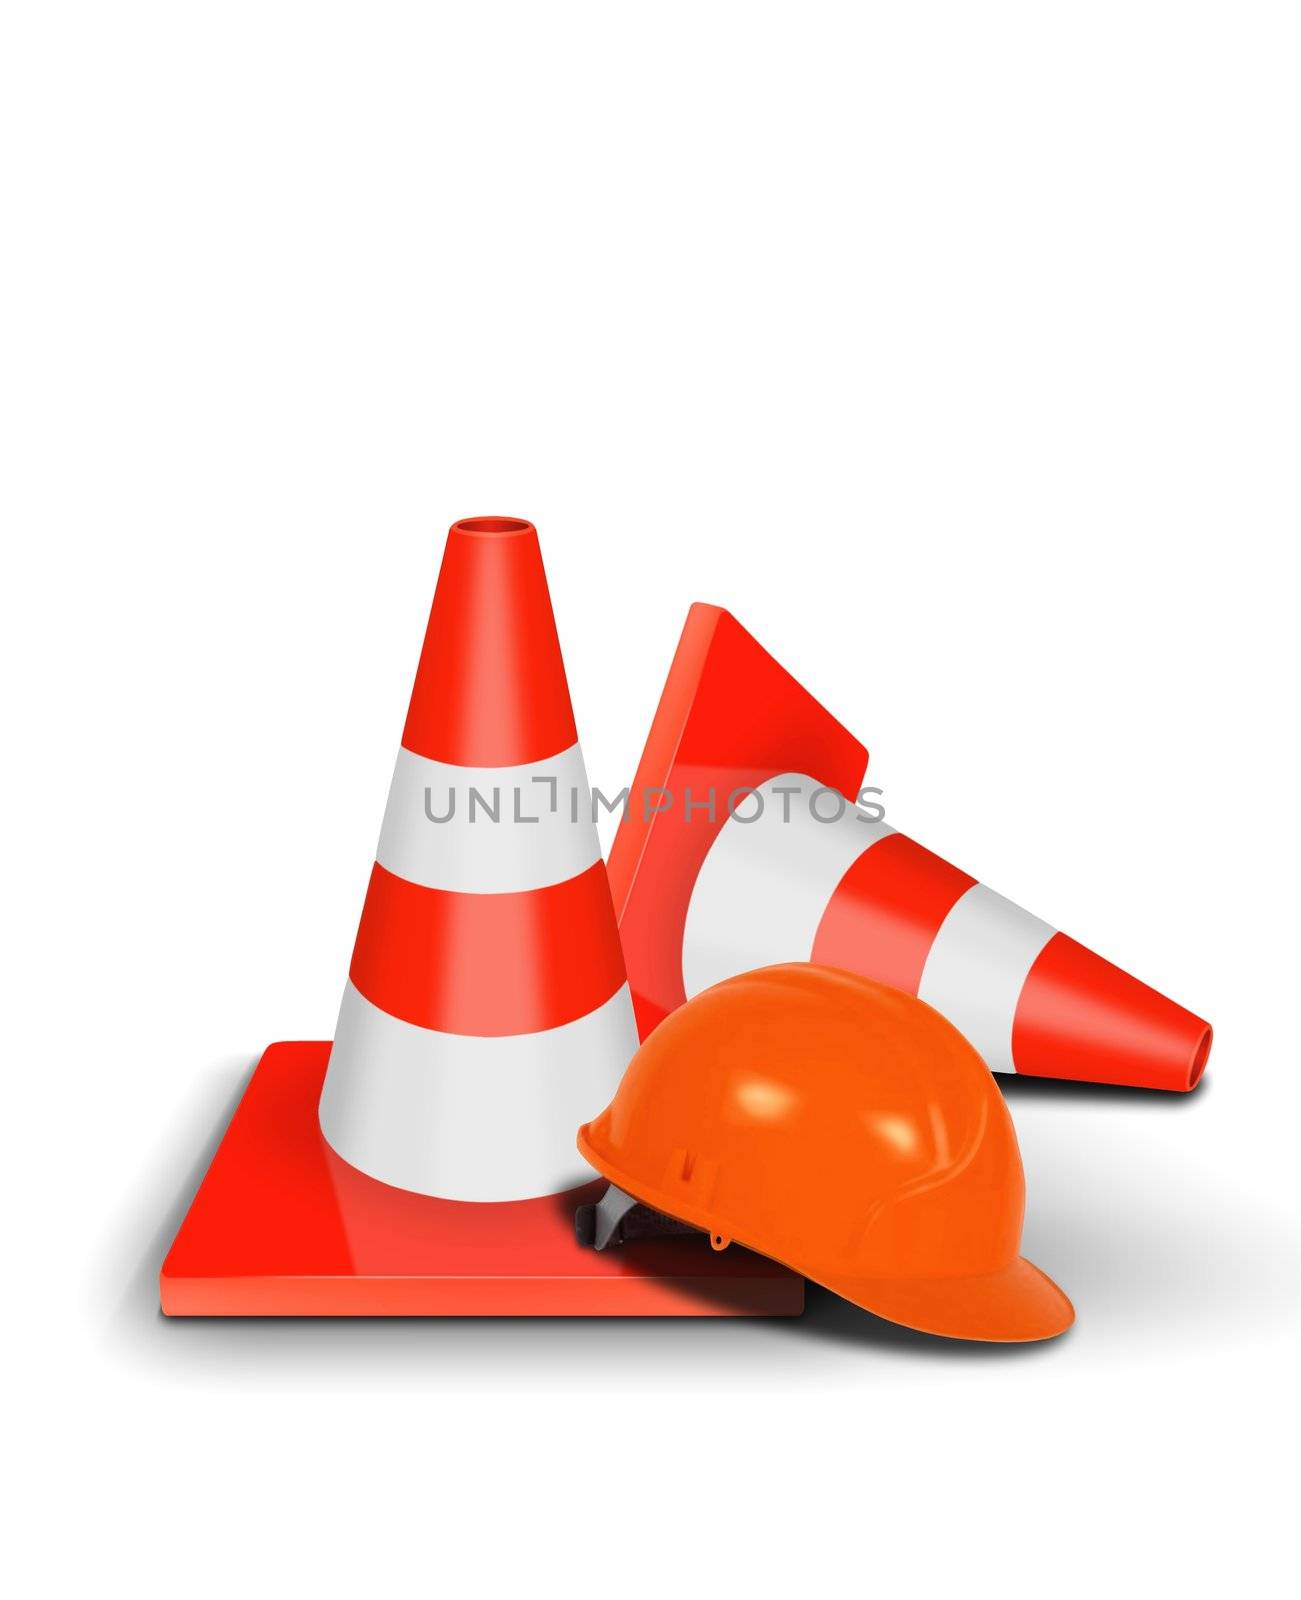 traffic cone and safety helmet